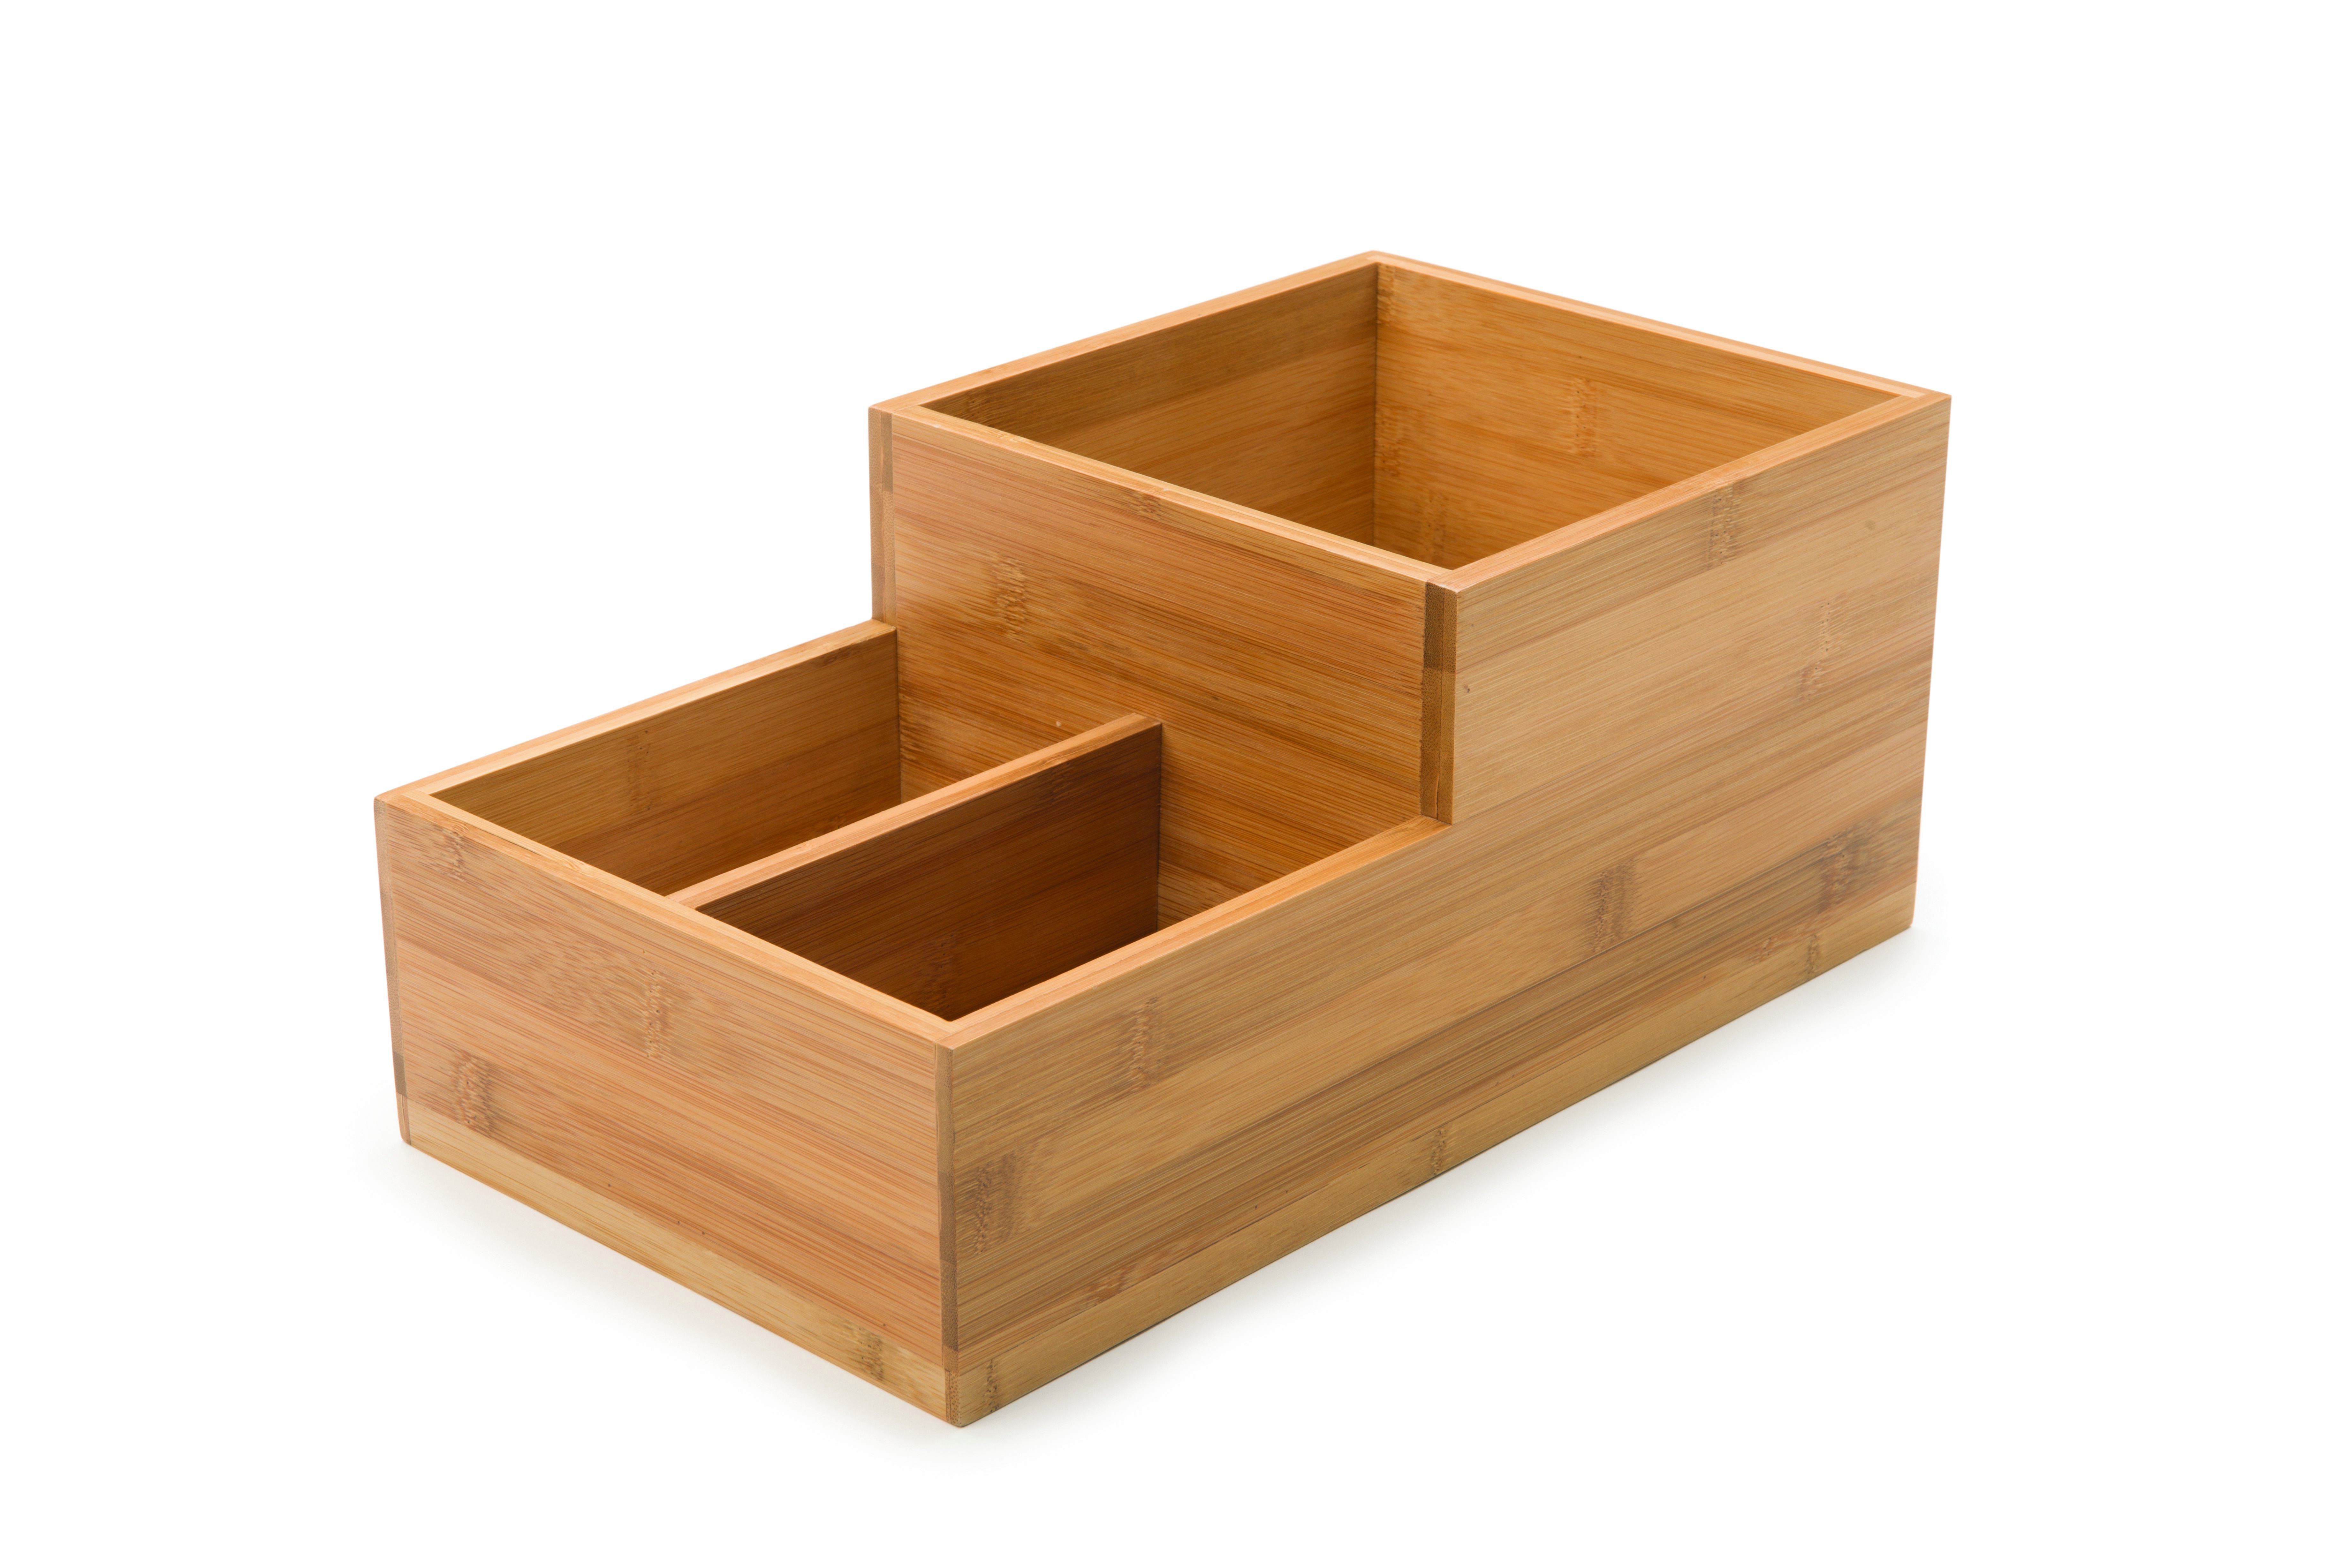 Rosseto BD108 Small Condiment Natural Bamboo Tray Bakery Building Block 8" x 14.75" x 6"